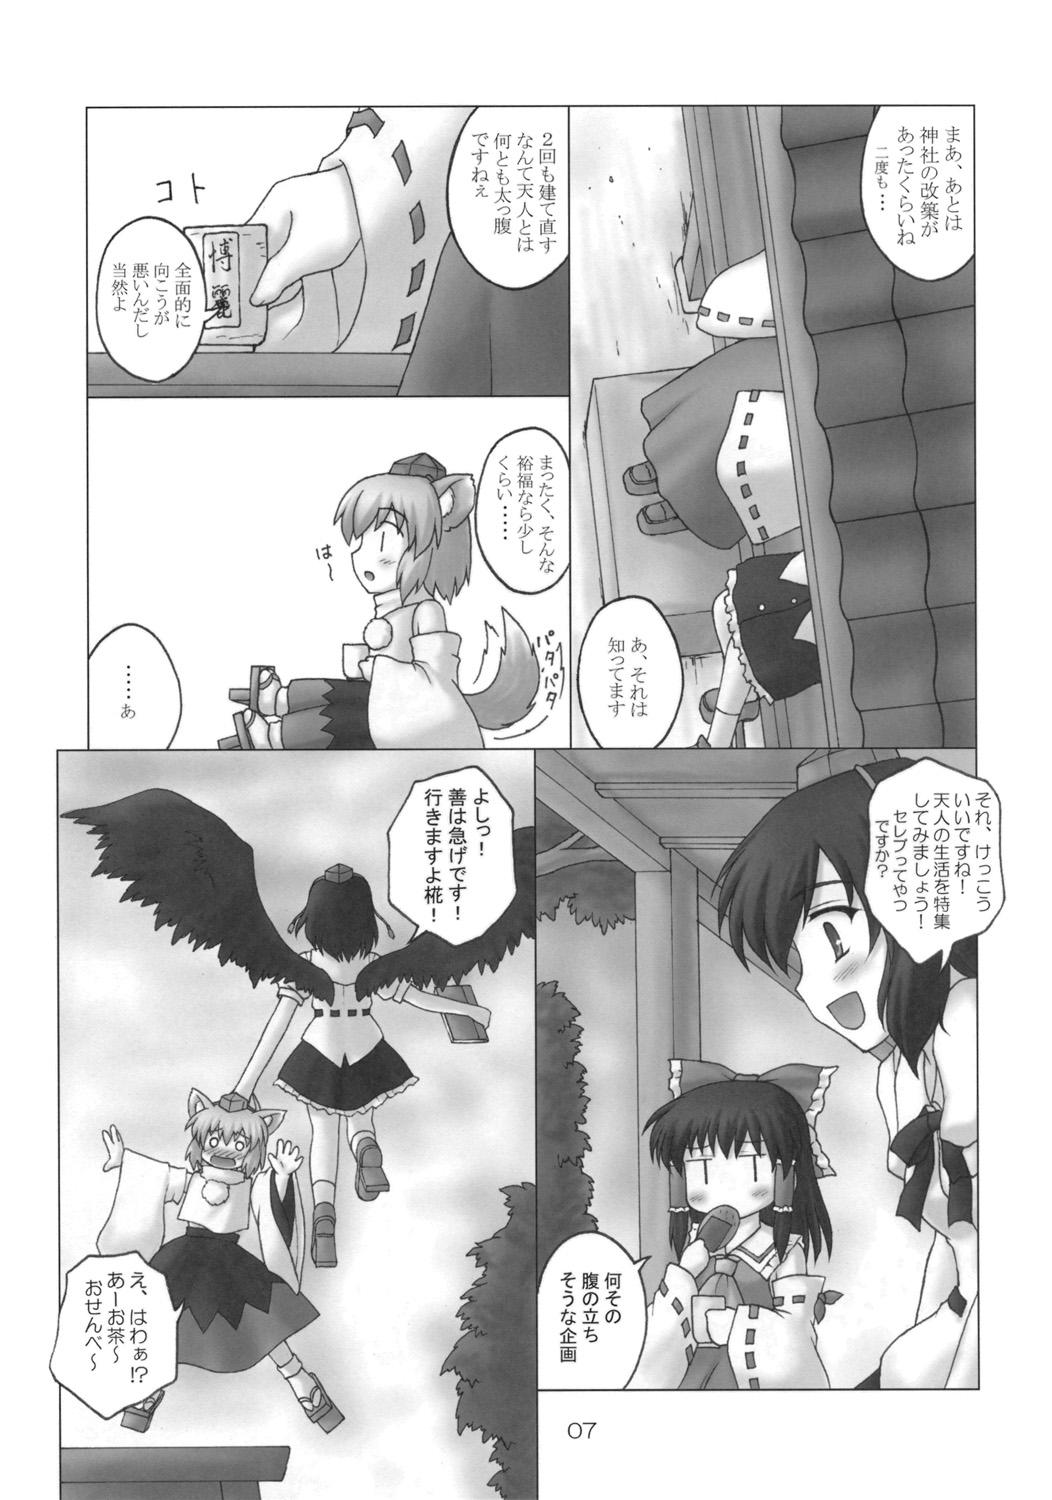 Missionary Position Porn Fuujin Hishou Re・ACT - Touhou project Fucking Girls - Page 6